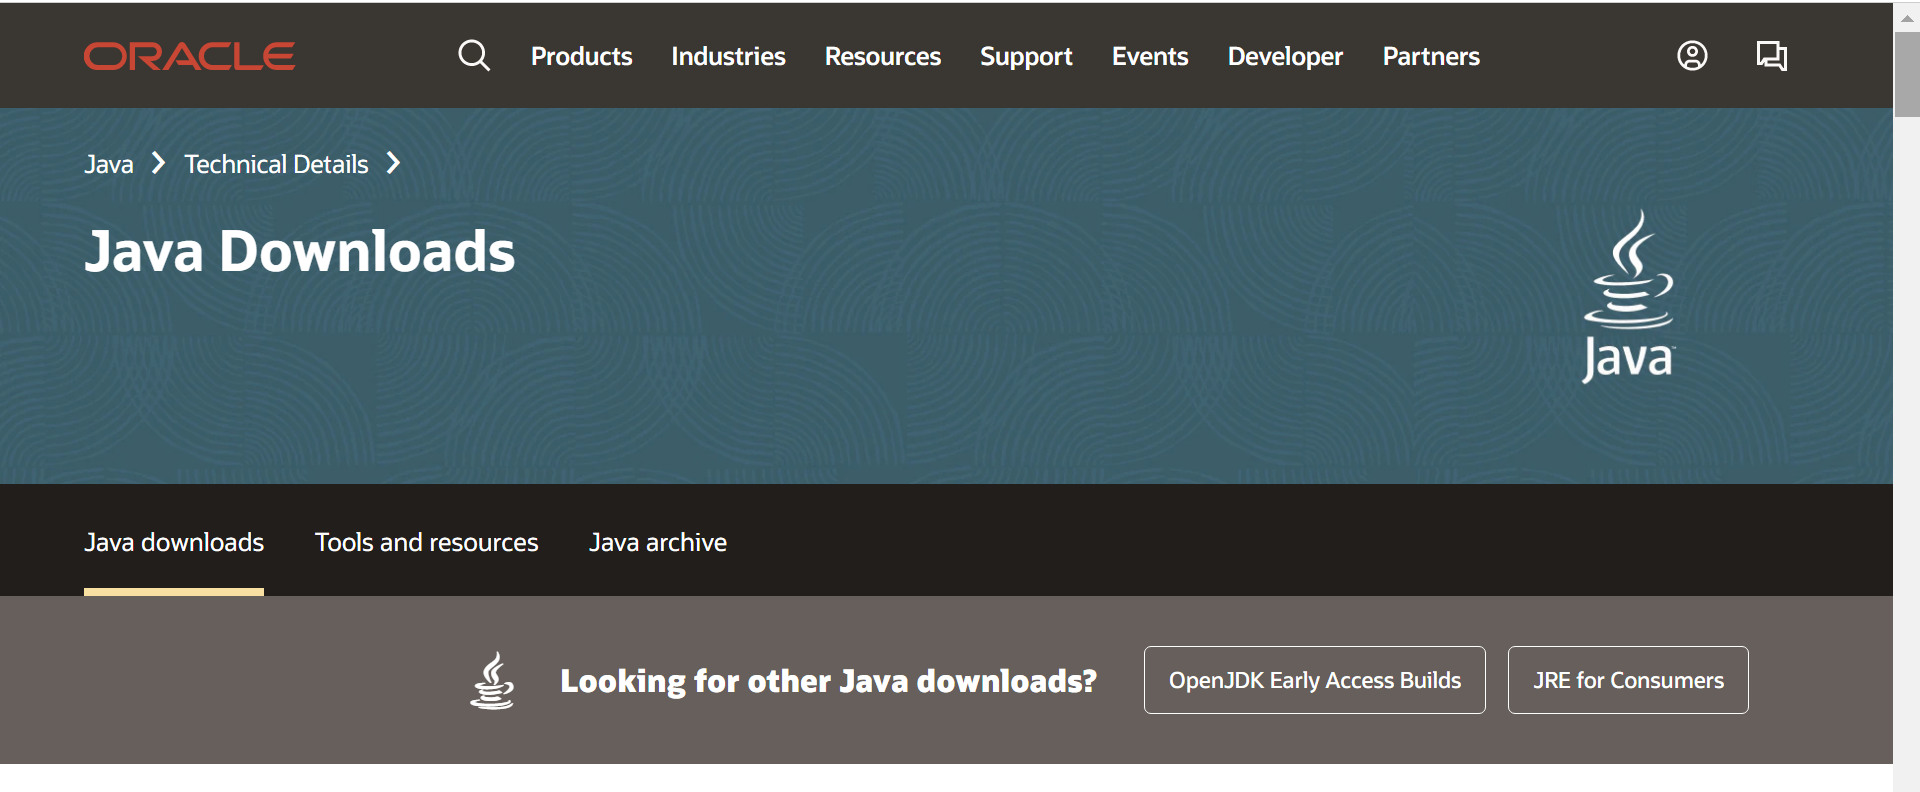 the Java downloads page